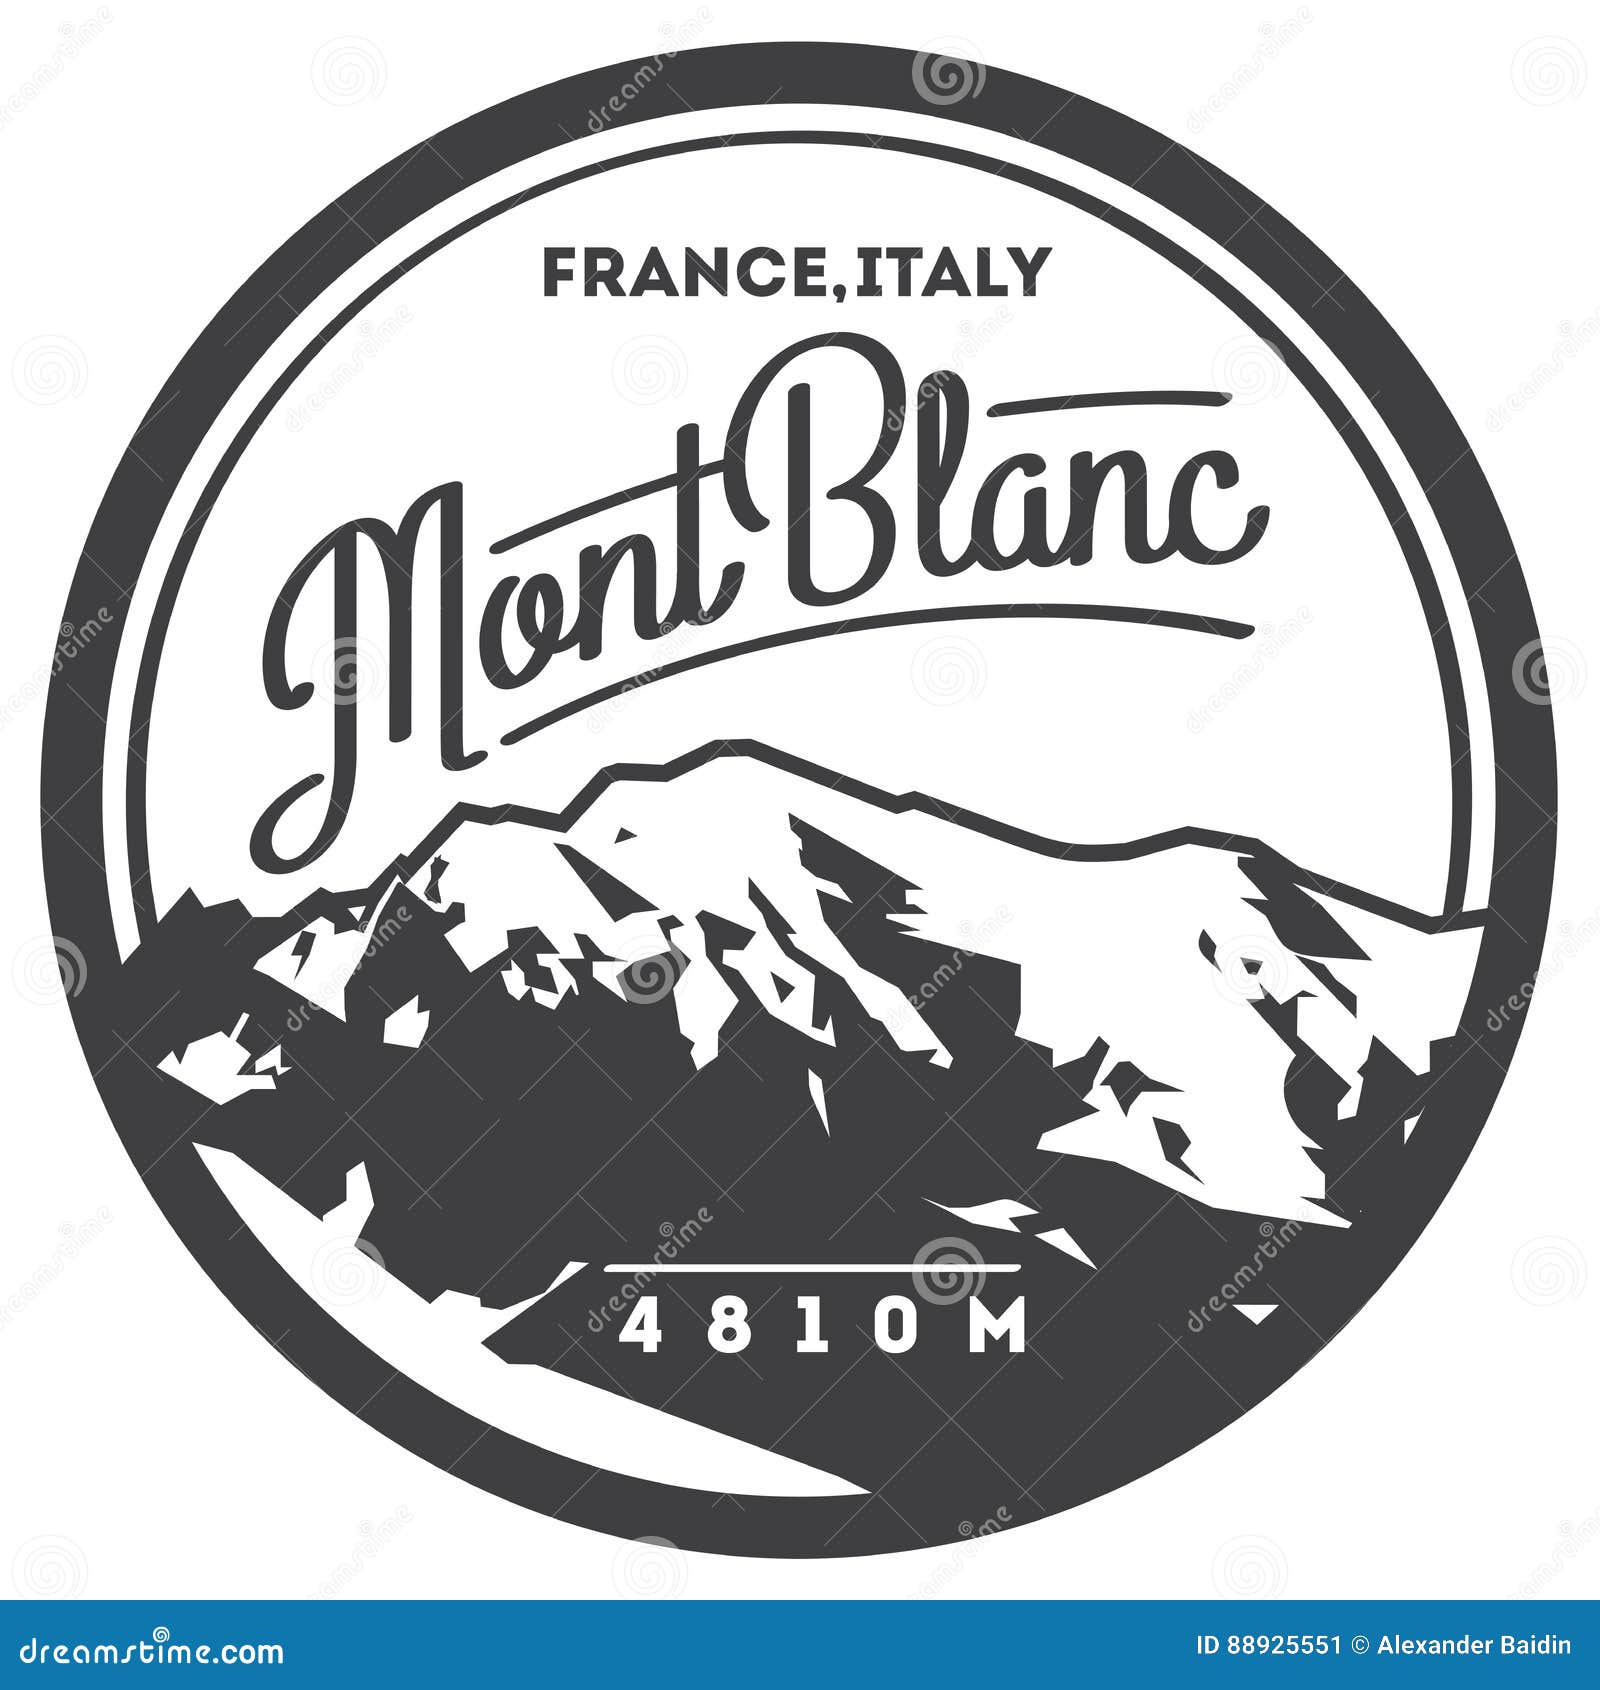 montblanc in alps, france, italy outdoor adventure badge. higest mountain in europe .